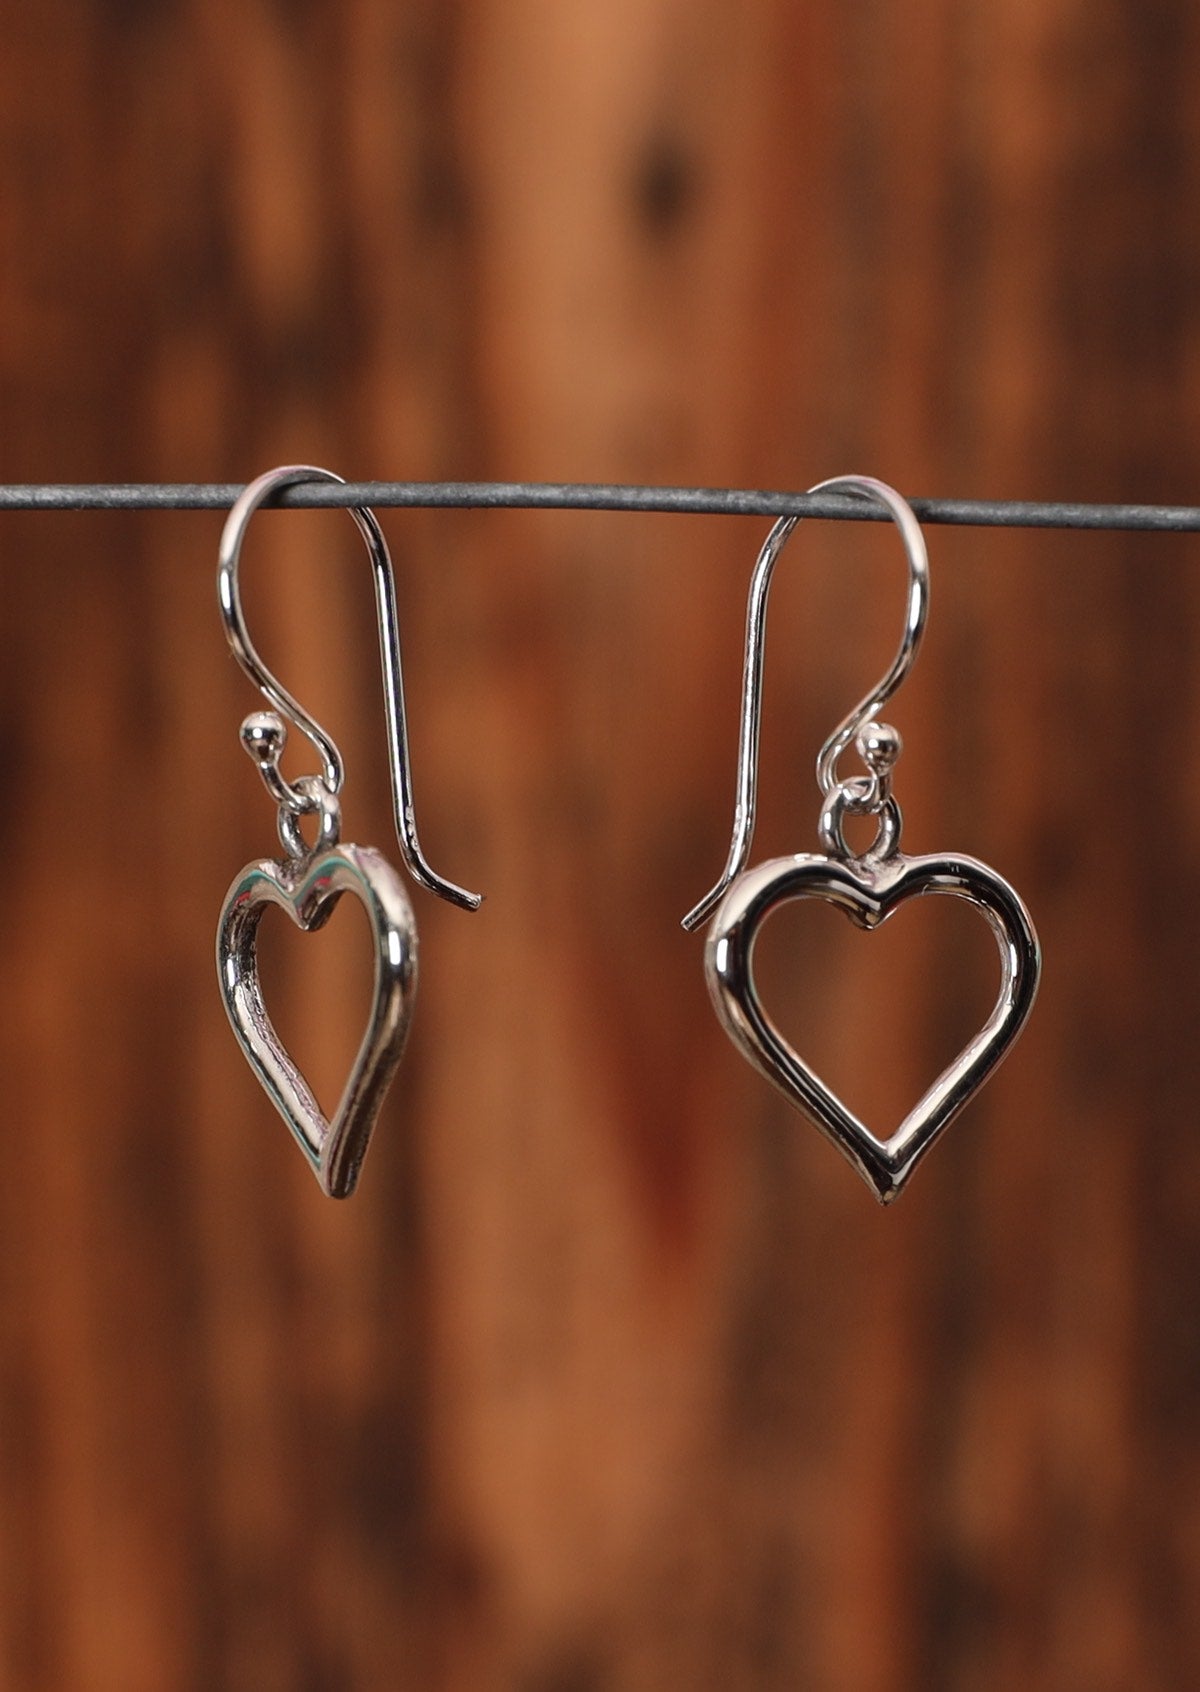 92.5% Silver heart shaped earrings on a wire for display.